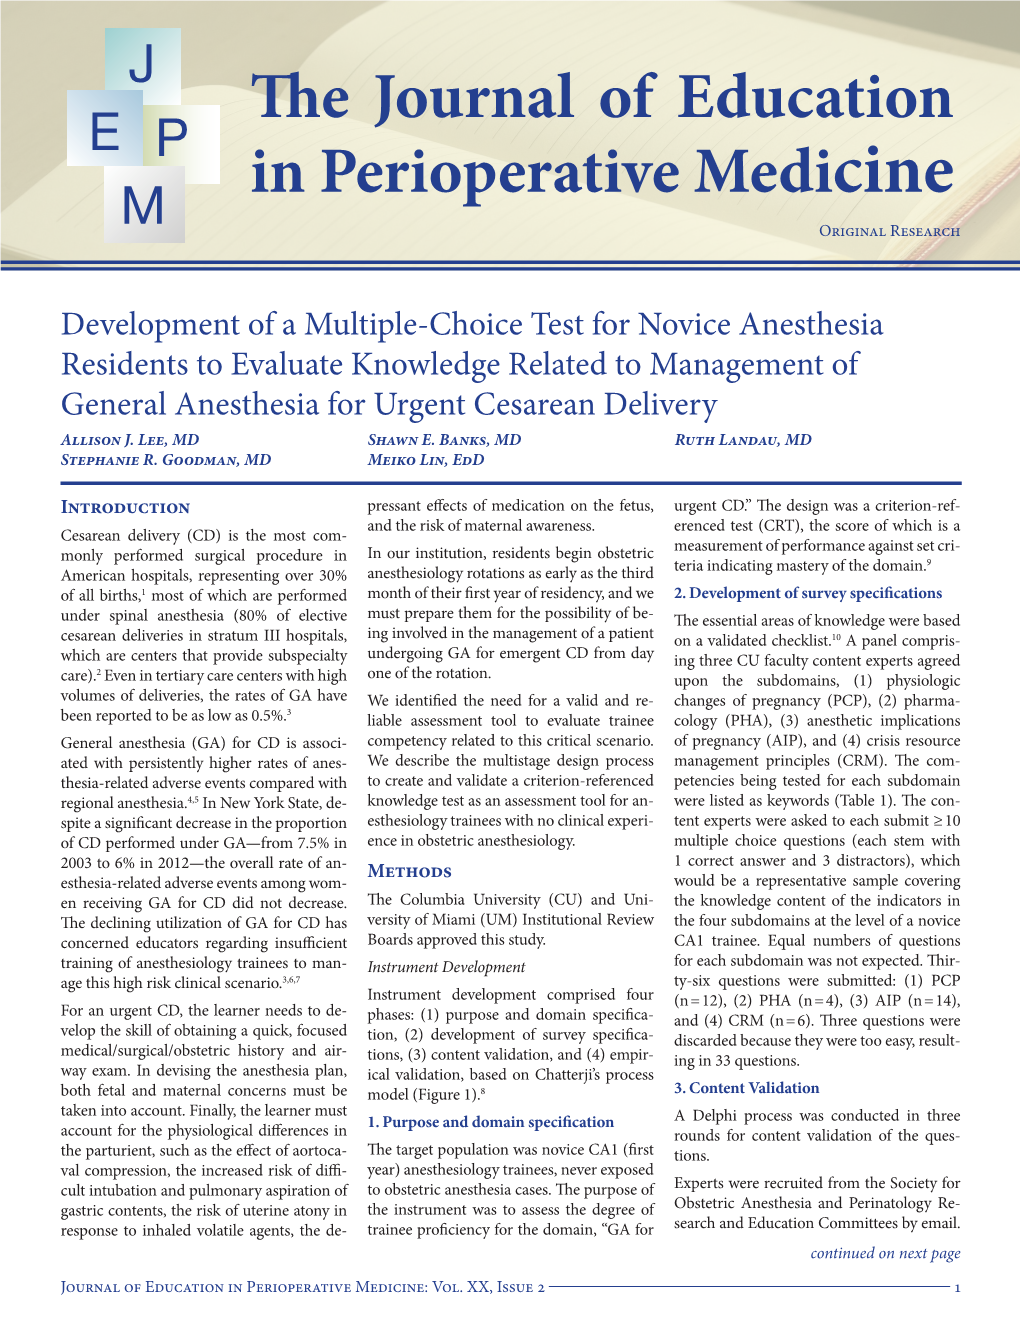 The Journal of Education in Perioperative Medicine